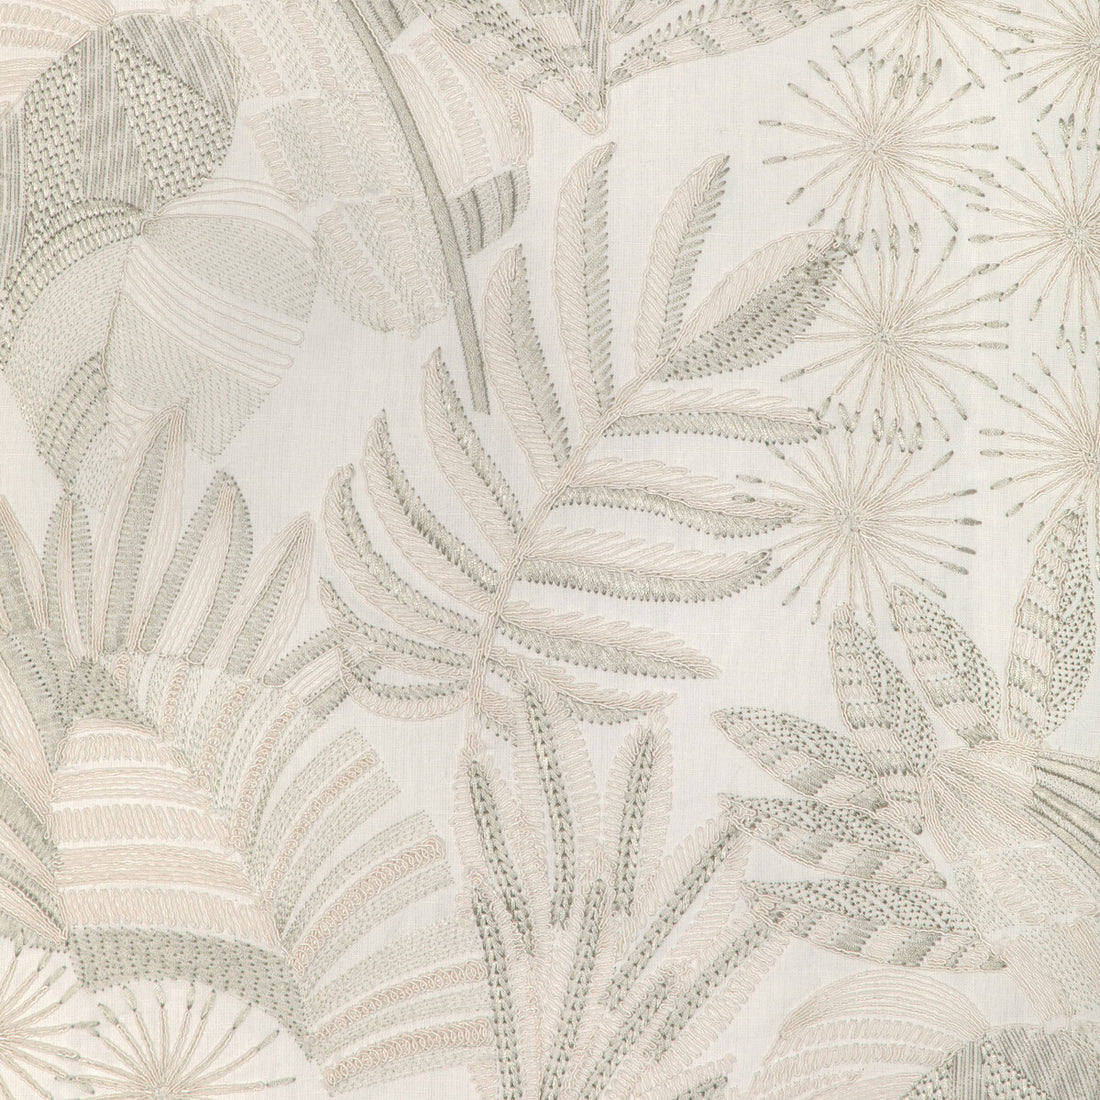 Marajo fabric in leaf color - pattern 37249.3.0 - by Kravet Couture in the Casa Botanica collection